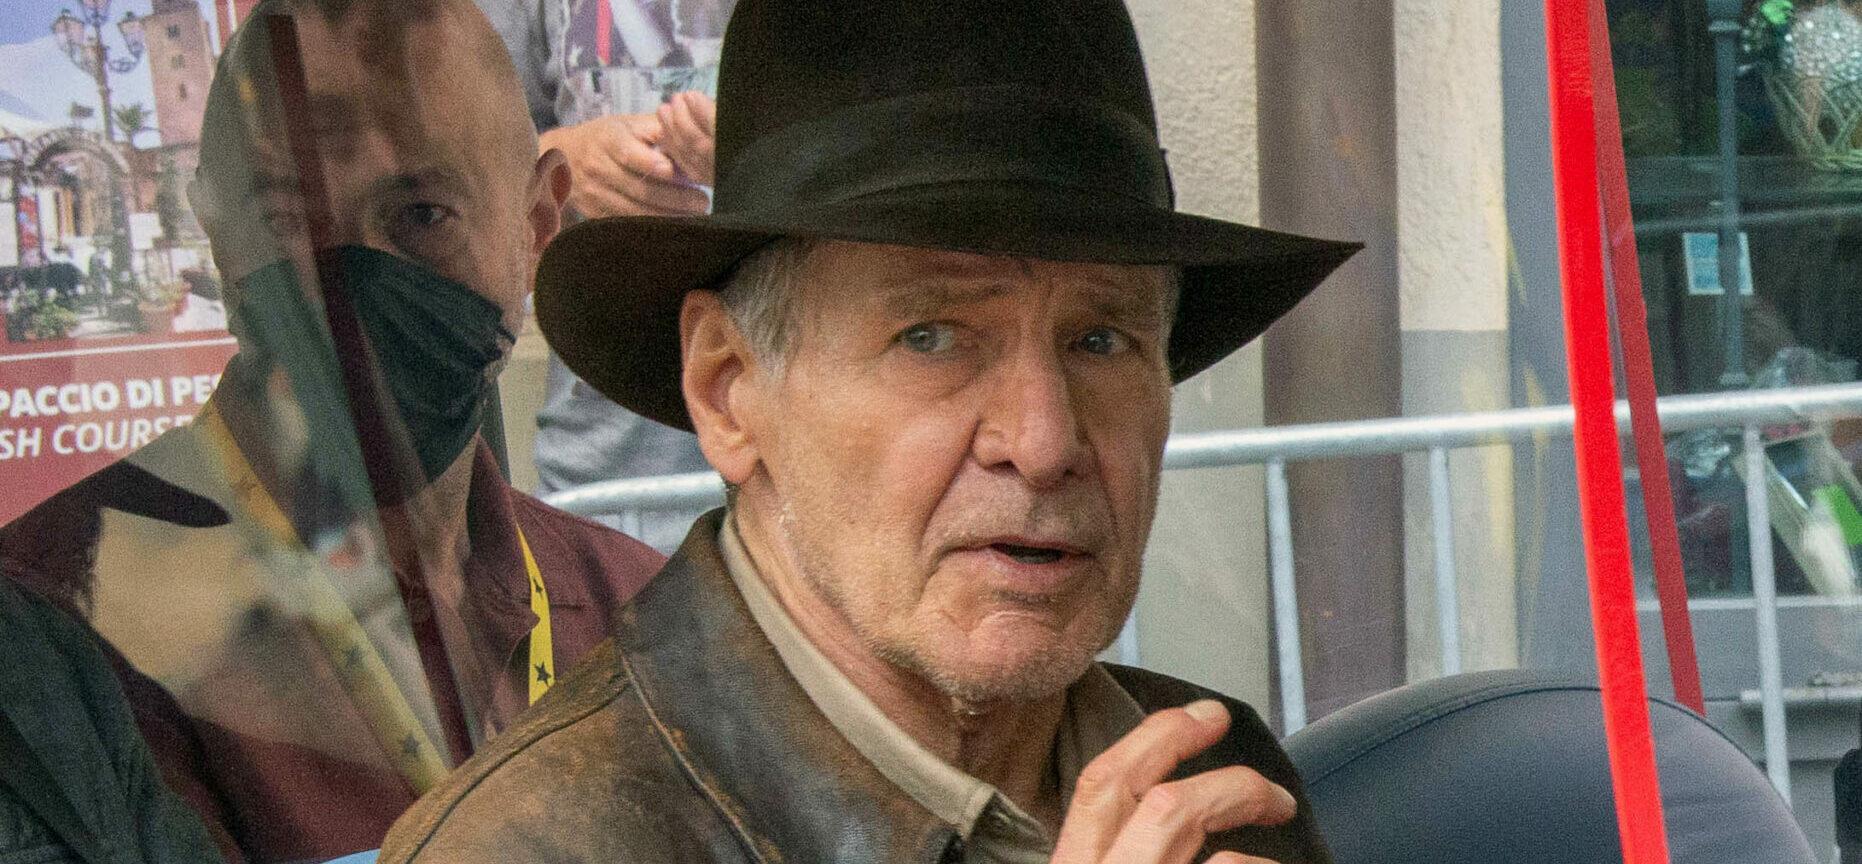 Harrison Ford Reportedly Assists Crew Member Having A Heart Attack On ‘Indiana Jones 5’ Set